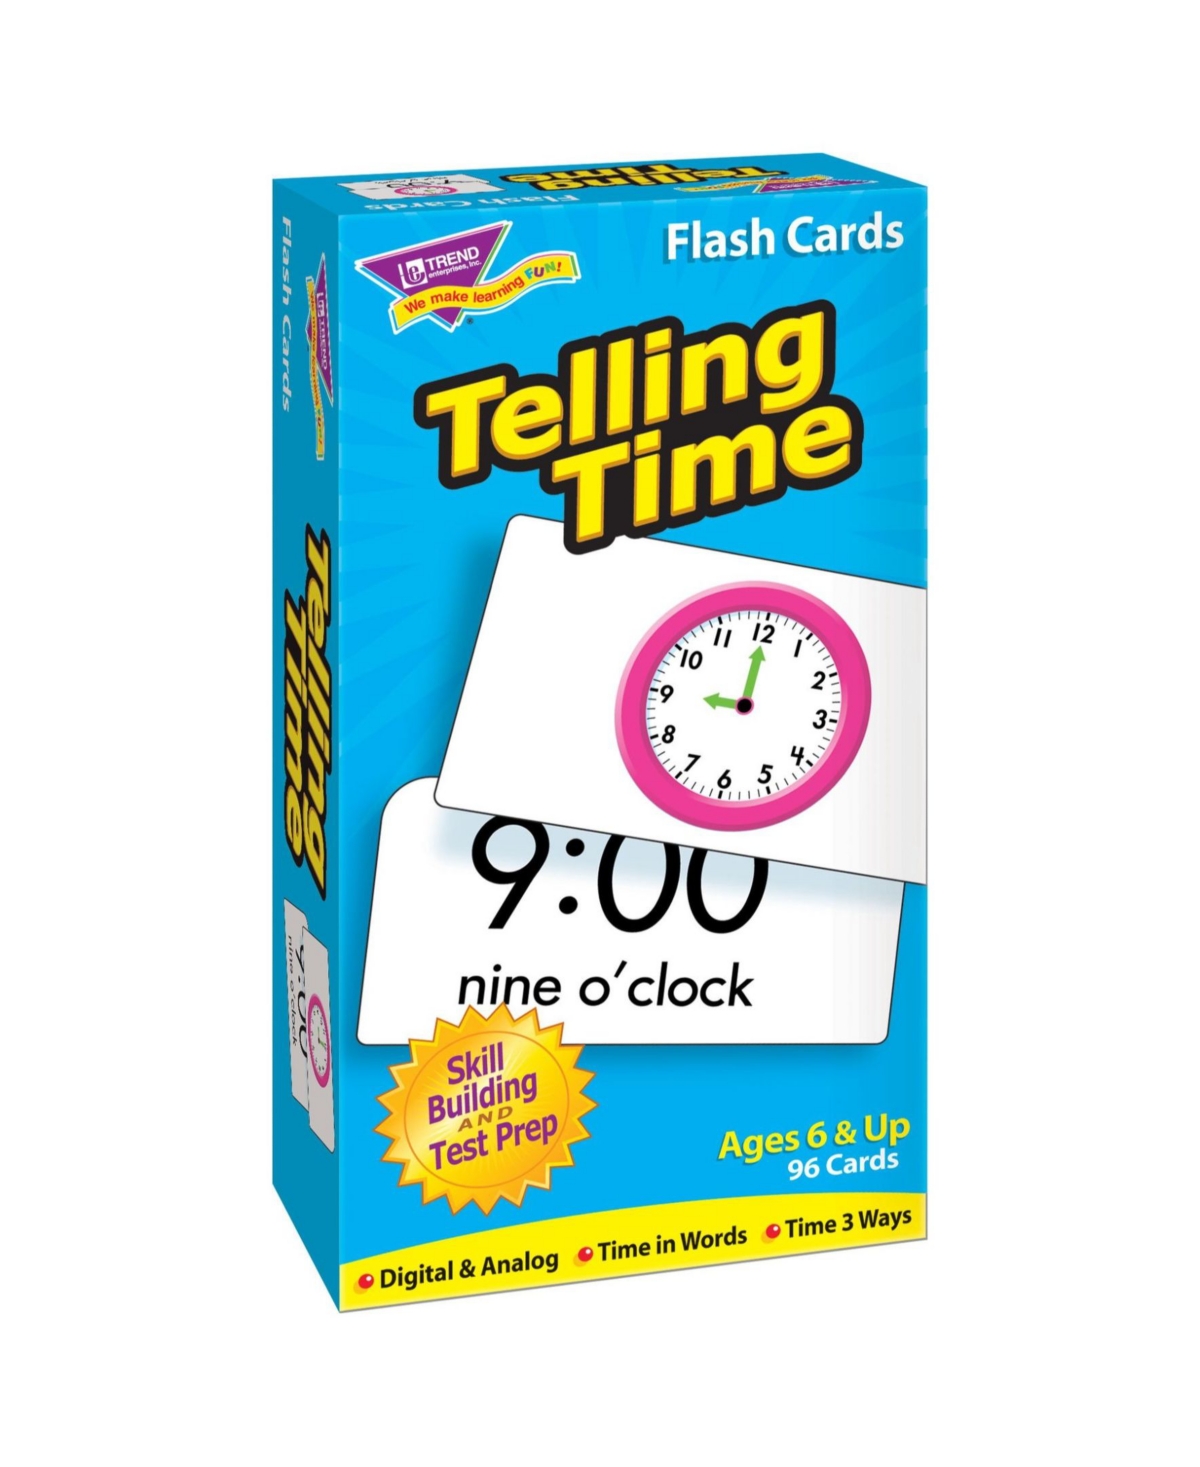 UPC 078628531084 product image for Telling Time Skill Drill Flash Cards | upcitemdb.com